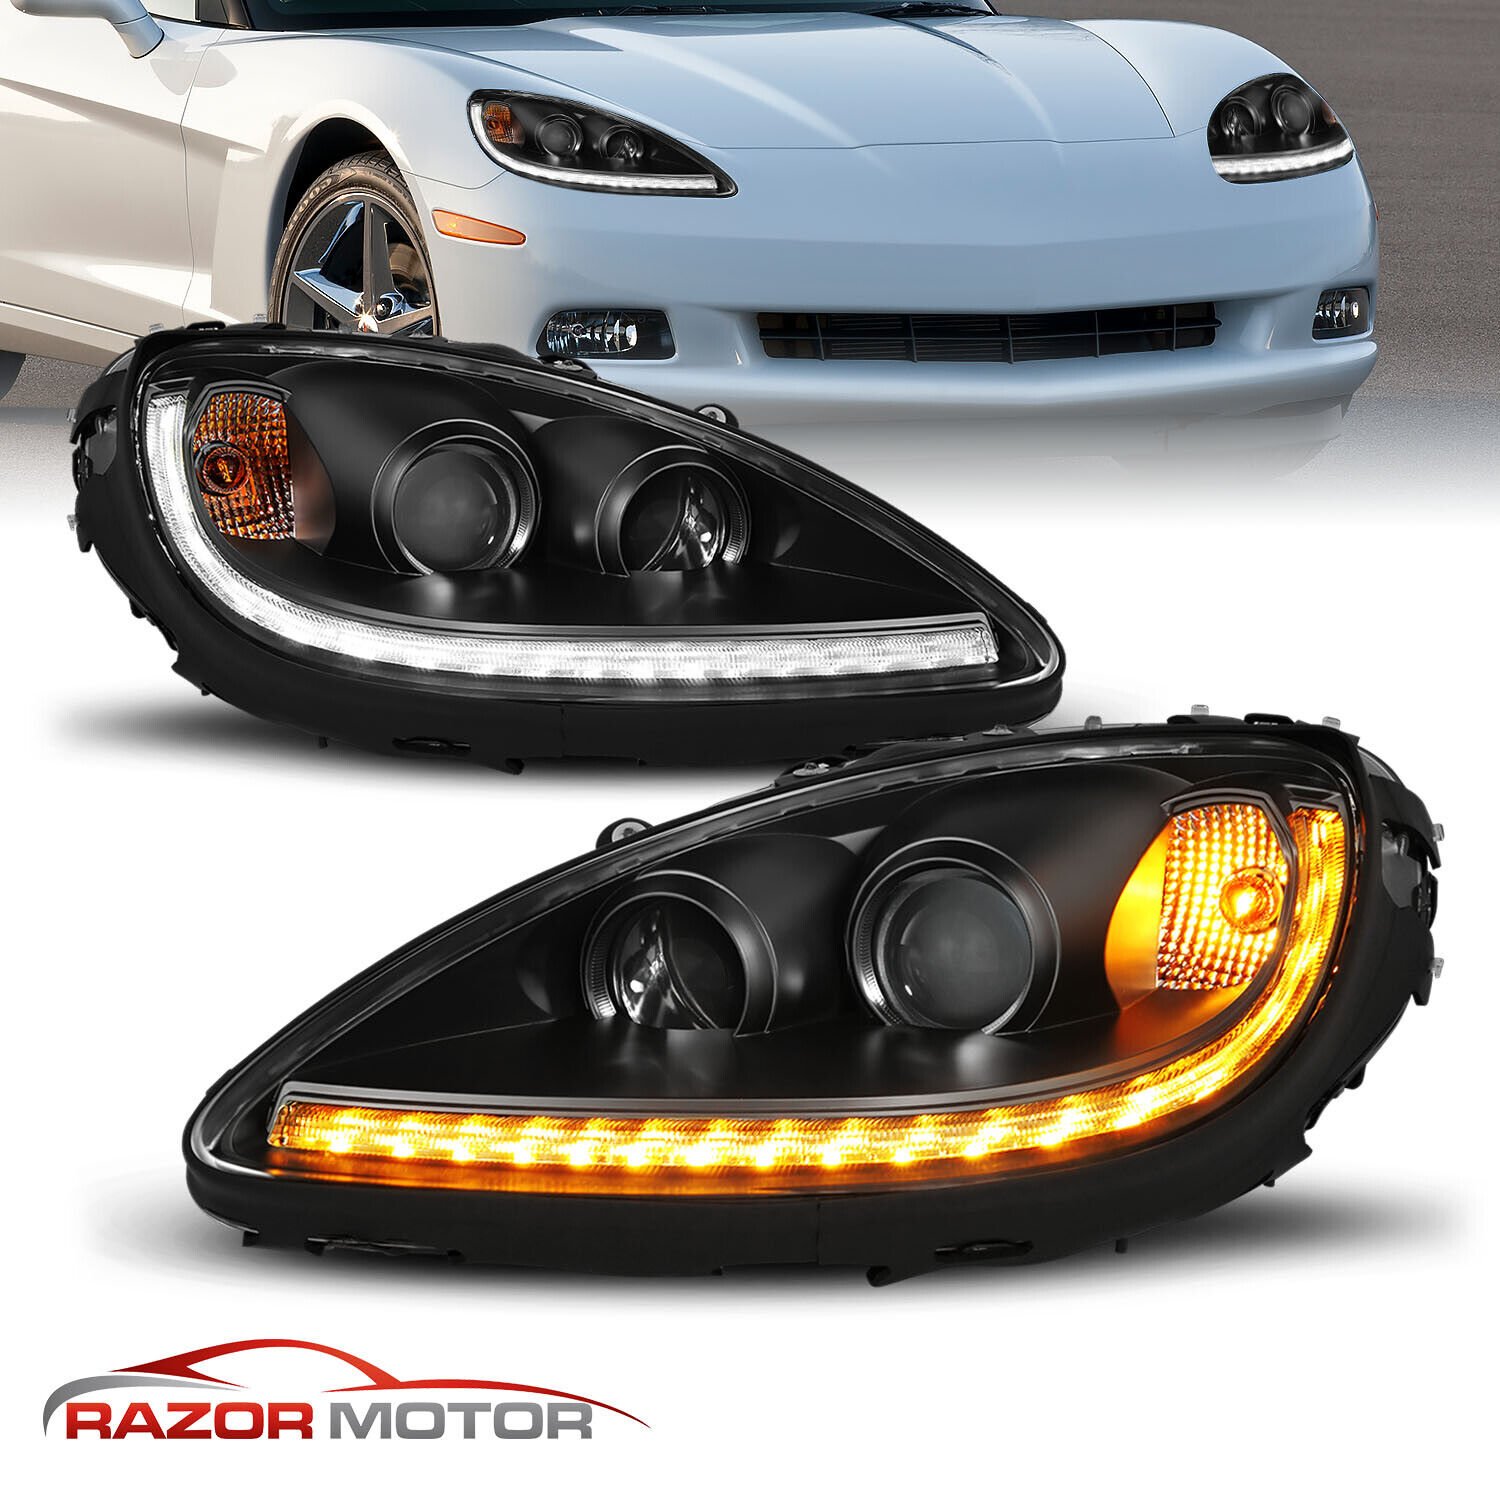 2005 - 2013 LED DRL Switchback For Chevy Corvette Black Projector Headlights